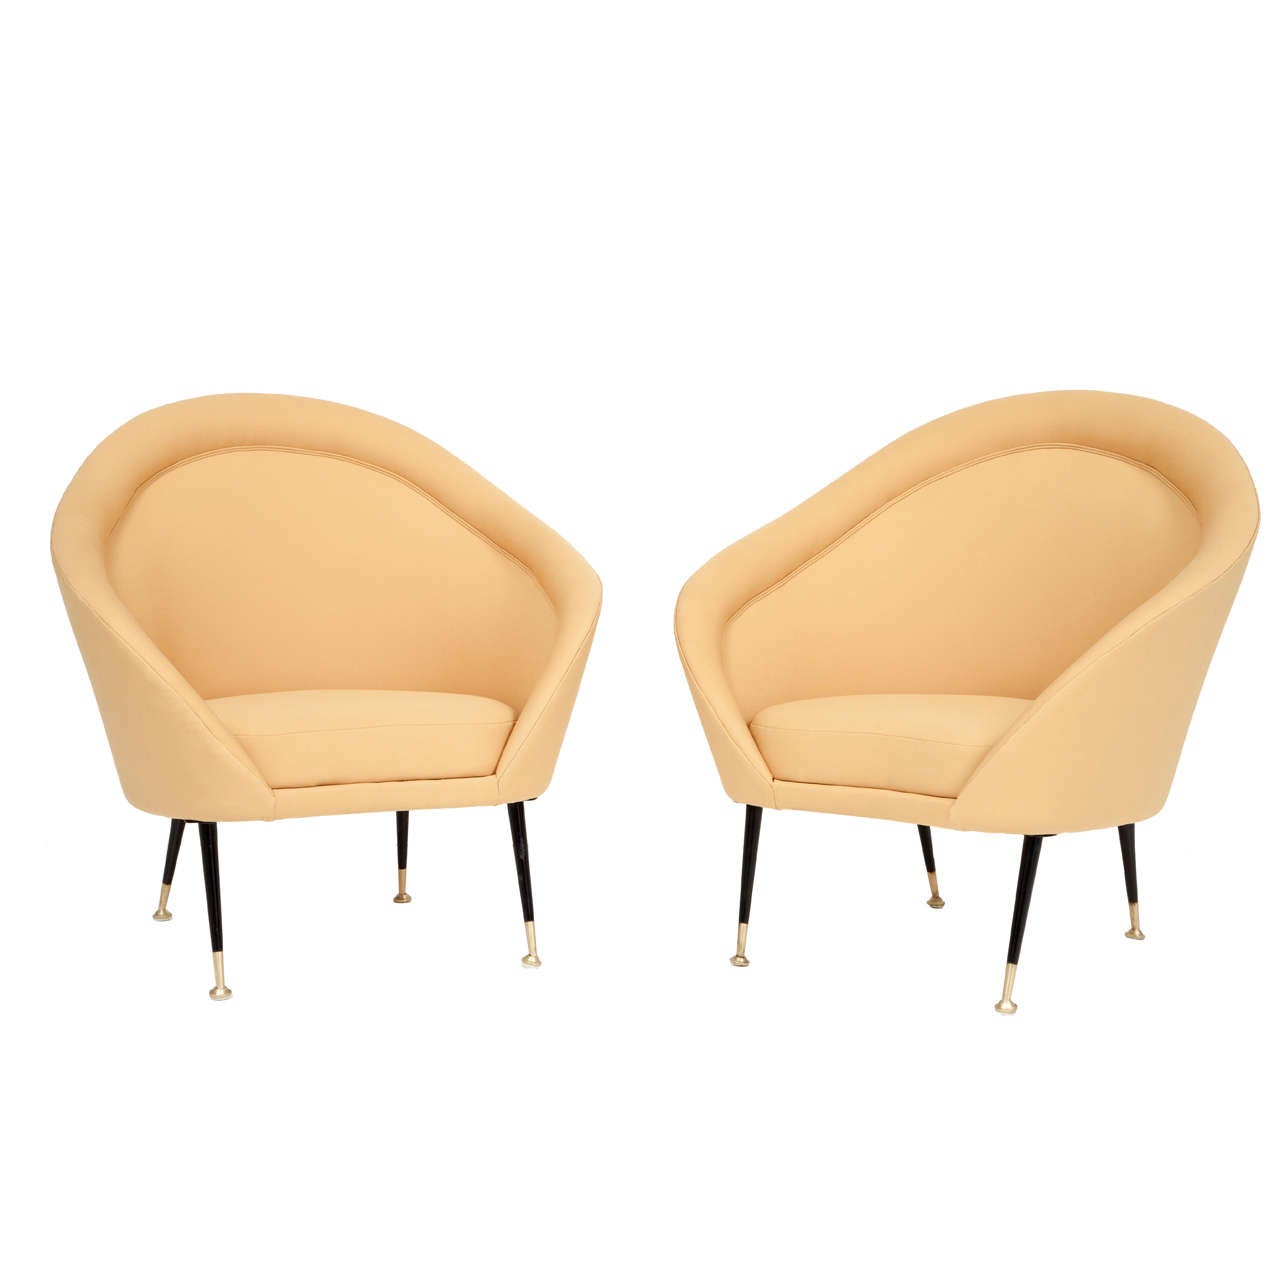 Unusual Mid Century Pair of Chairs